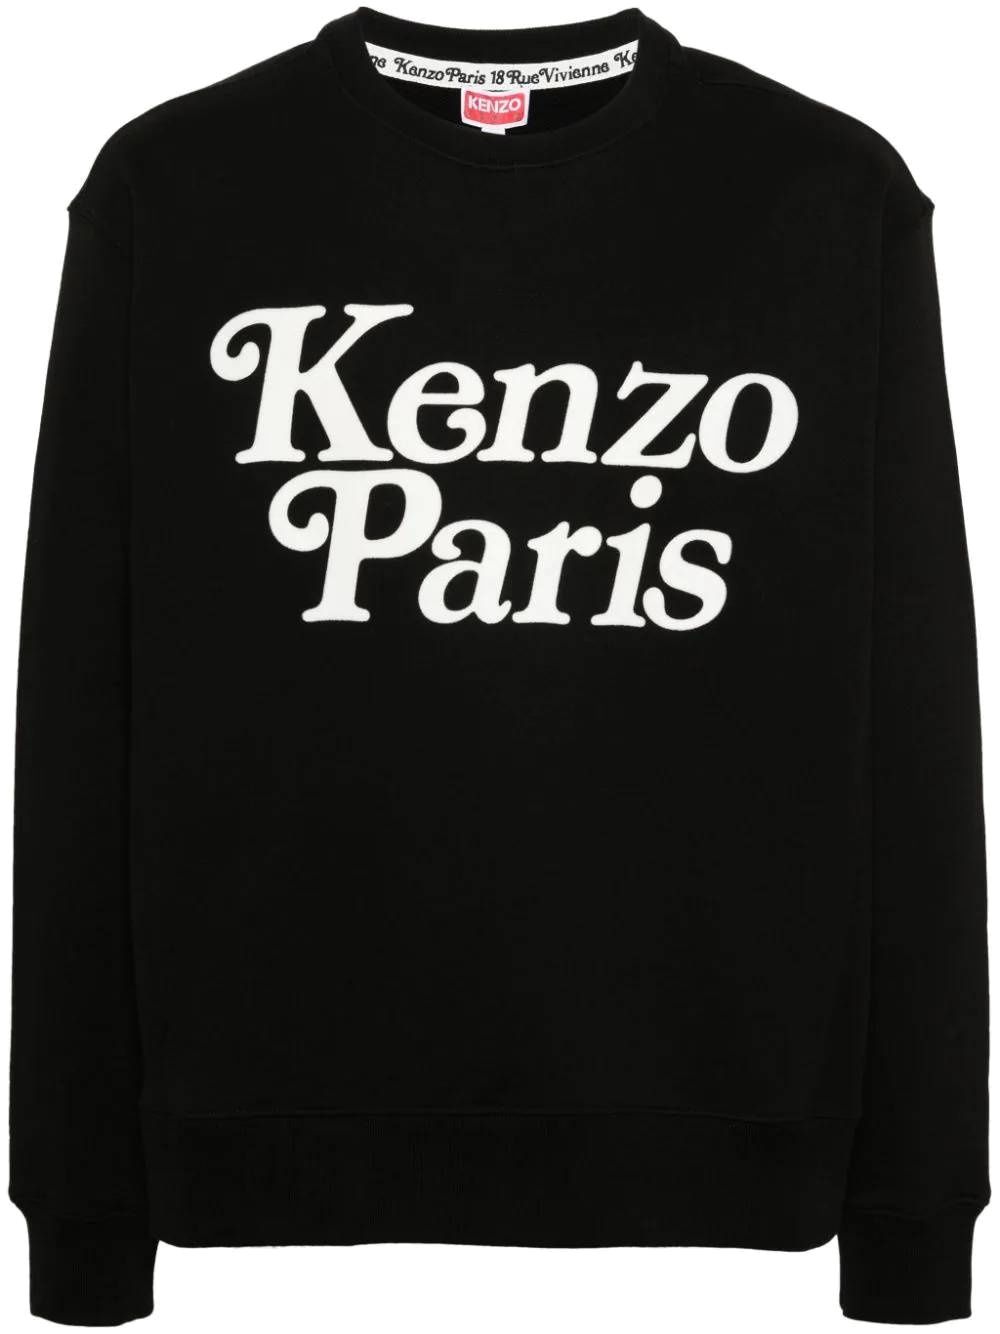 Sweatshirt with logo on the front